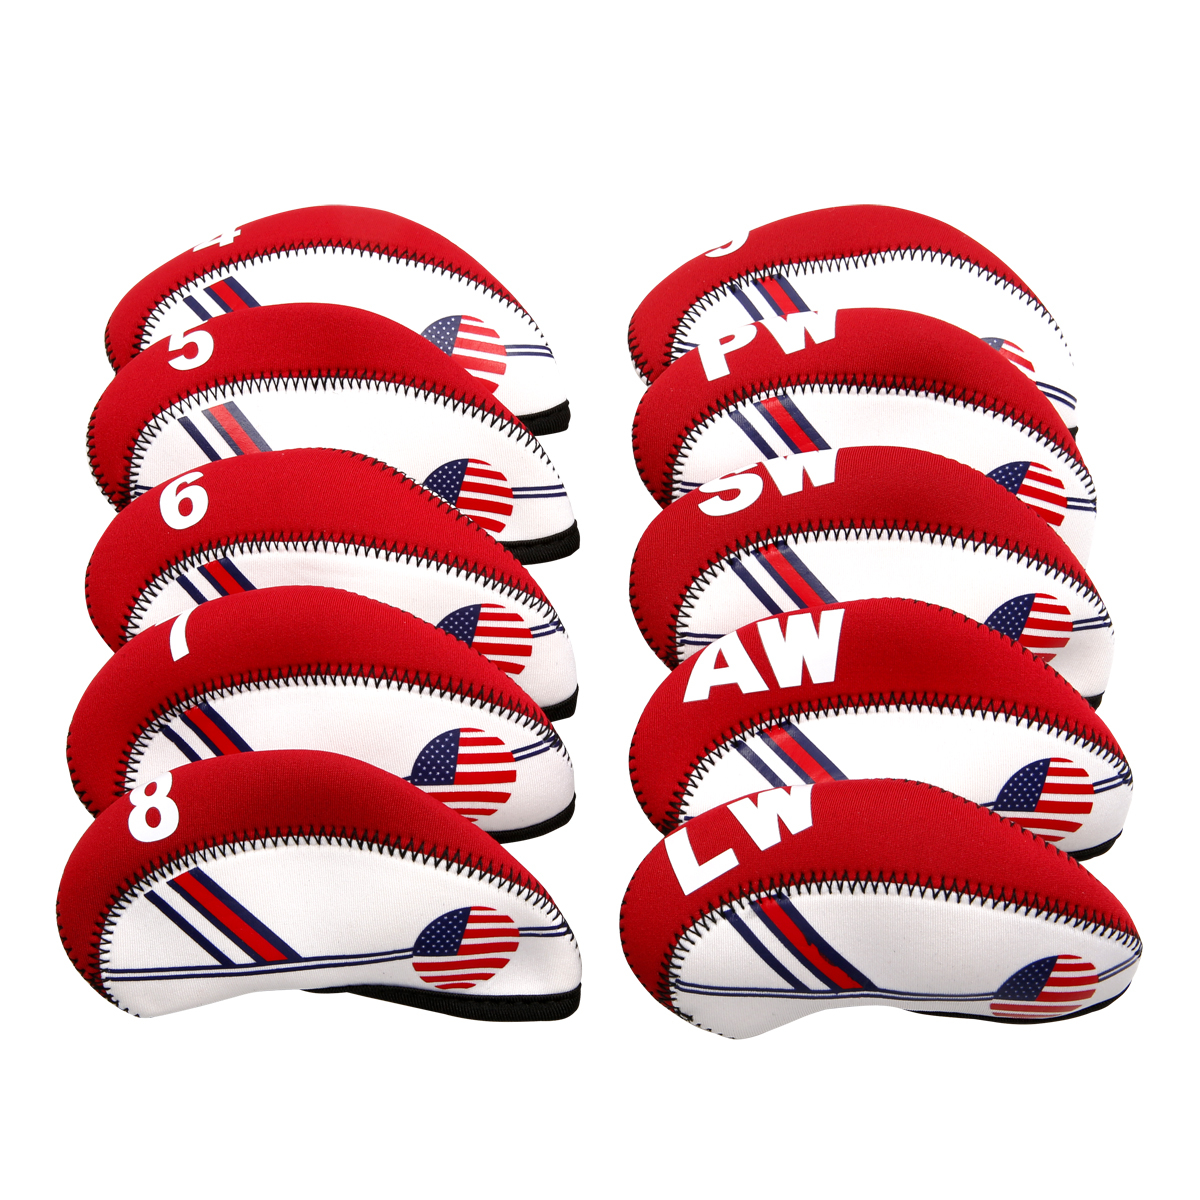 10Pcsset-Golf-Club-Iron-Head-Cover-Headcover-Neoprene-Protect-Set-National-Flag-Headcover-1469336-4